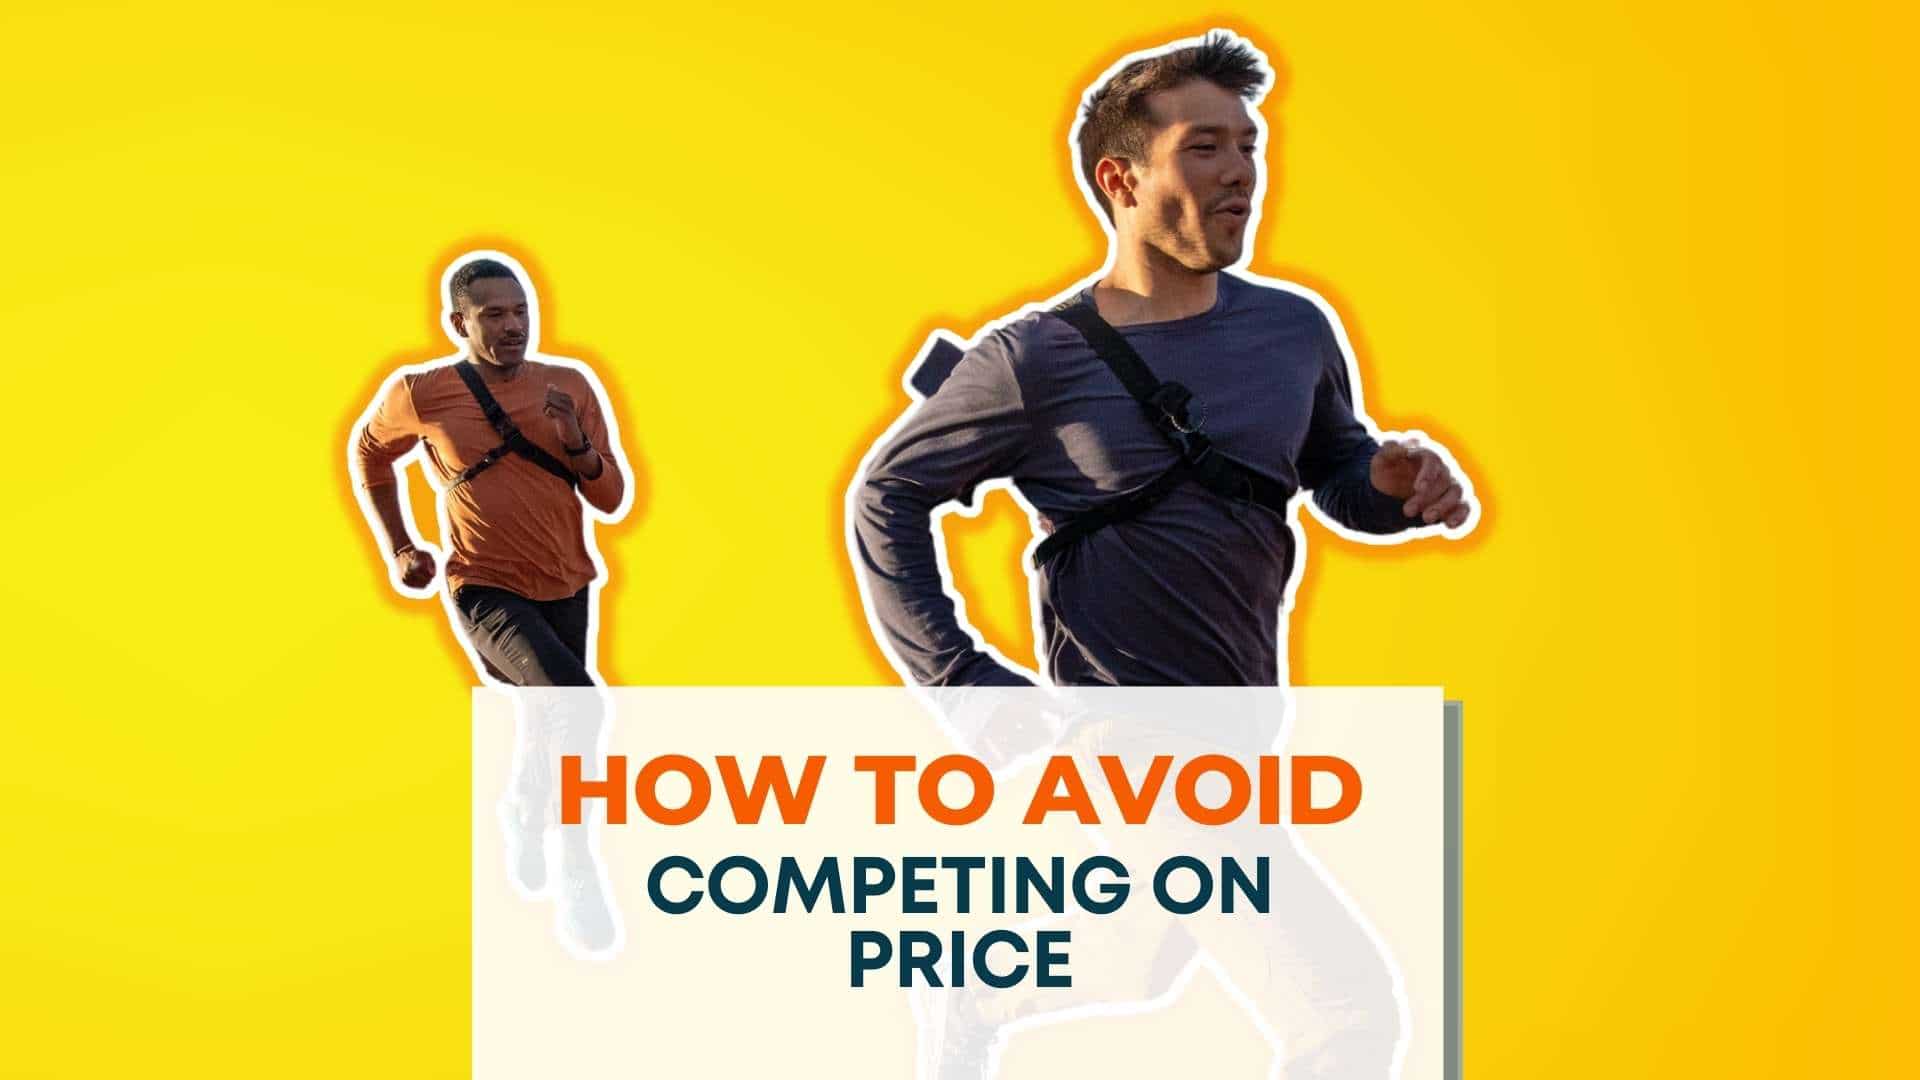 How To Avoid Competing On Price